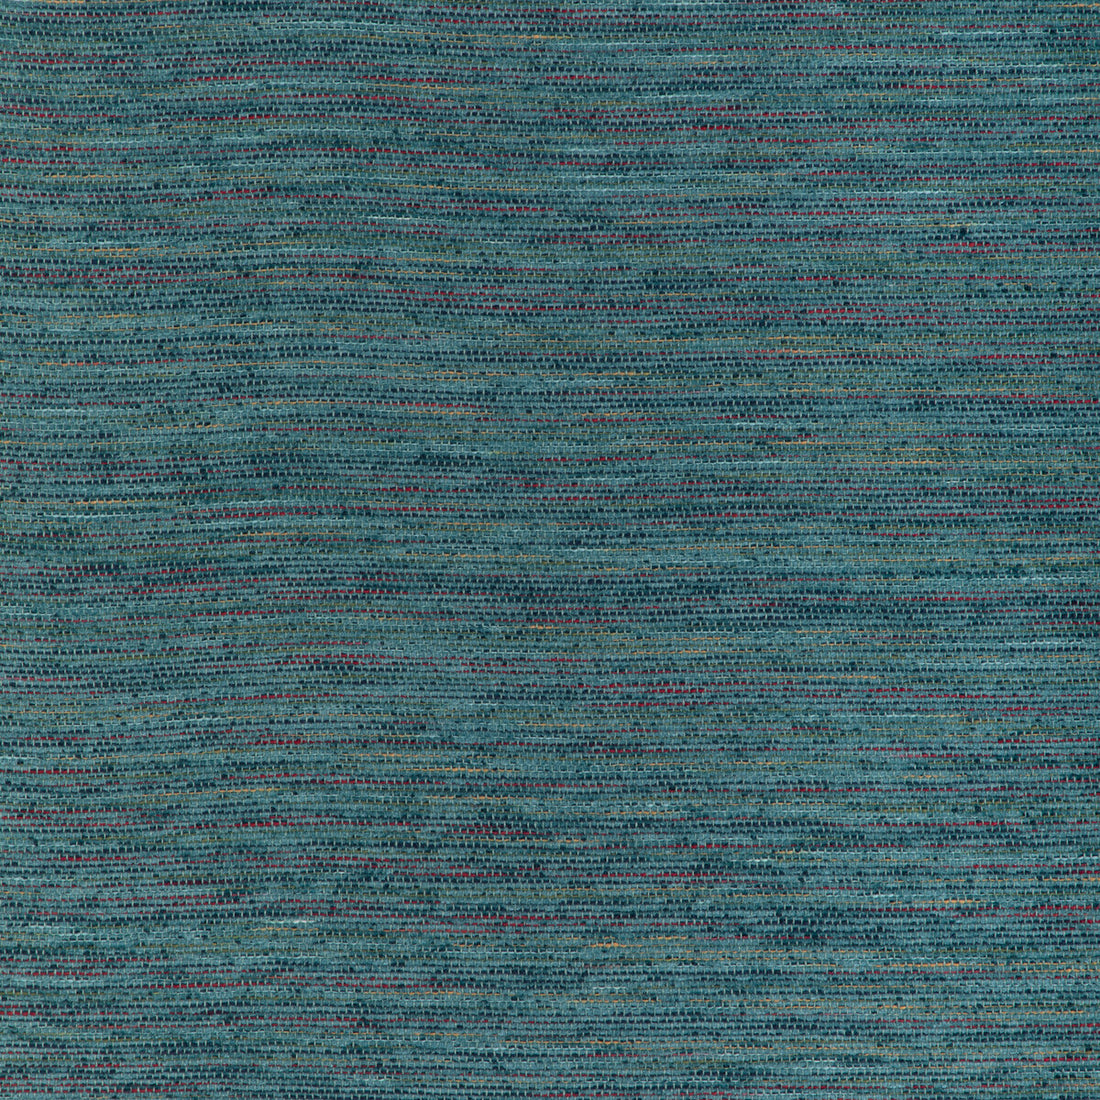 Foray Texture fabric in lake color - pattern 8023156.13.0 - by Brunschwig &amp; Fils in the Chambery Textures IV collection